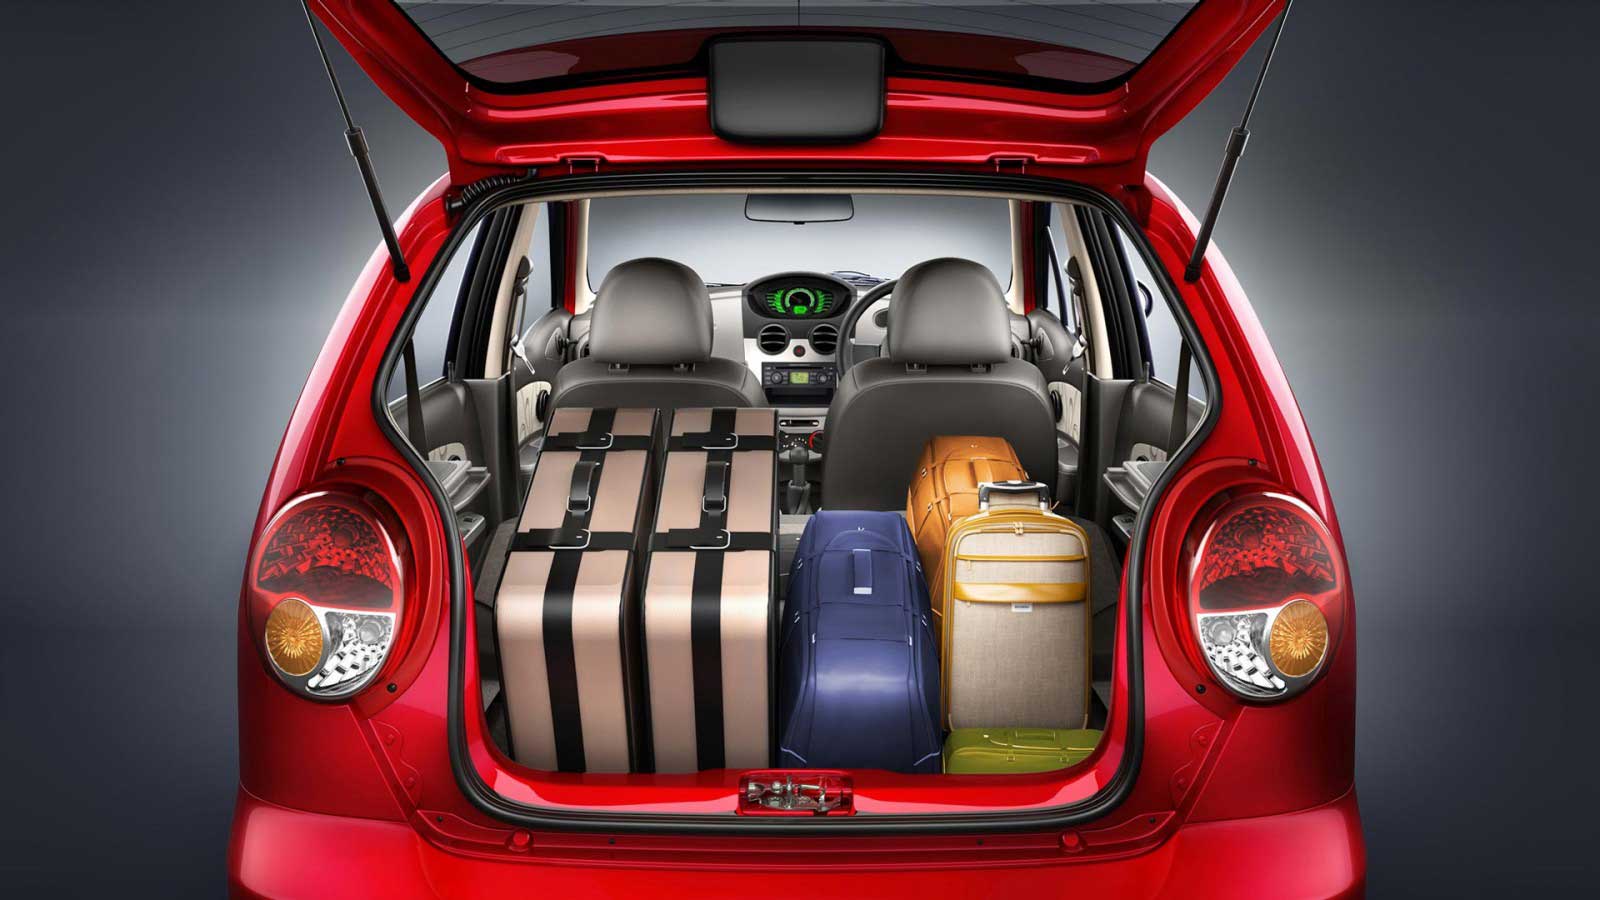 Chevrolet Spark 1.0 BS-IV OBDII Interior luggage space